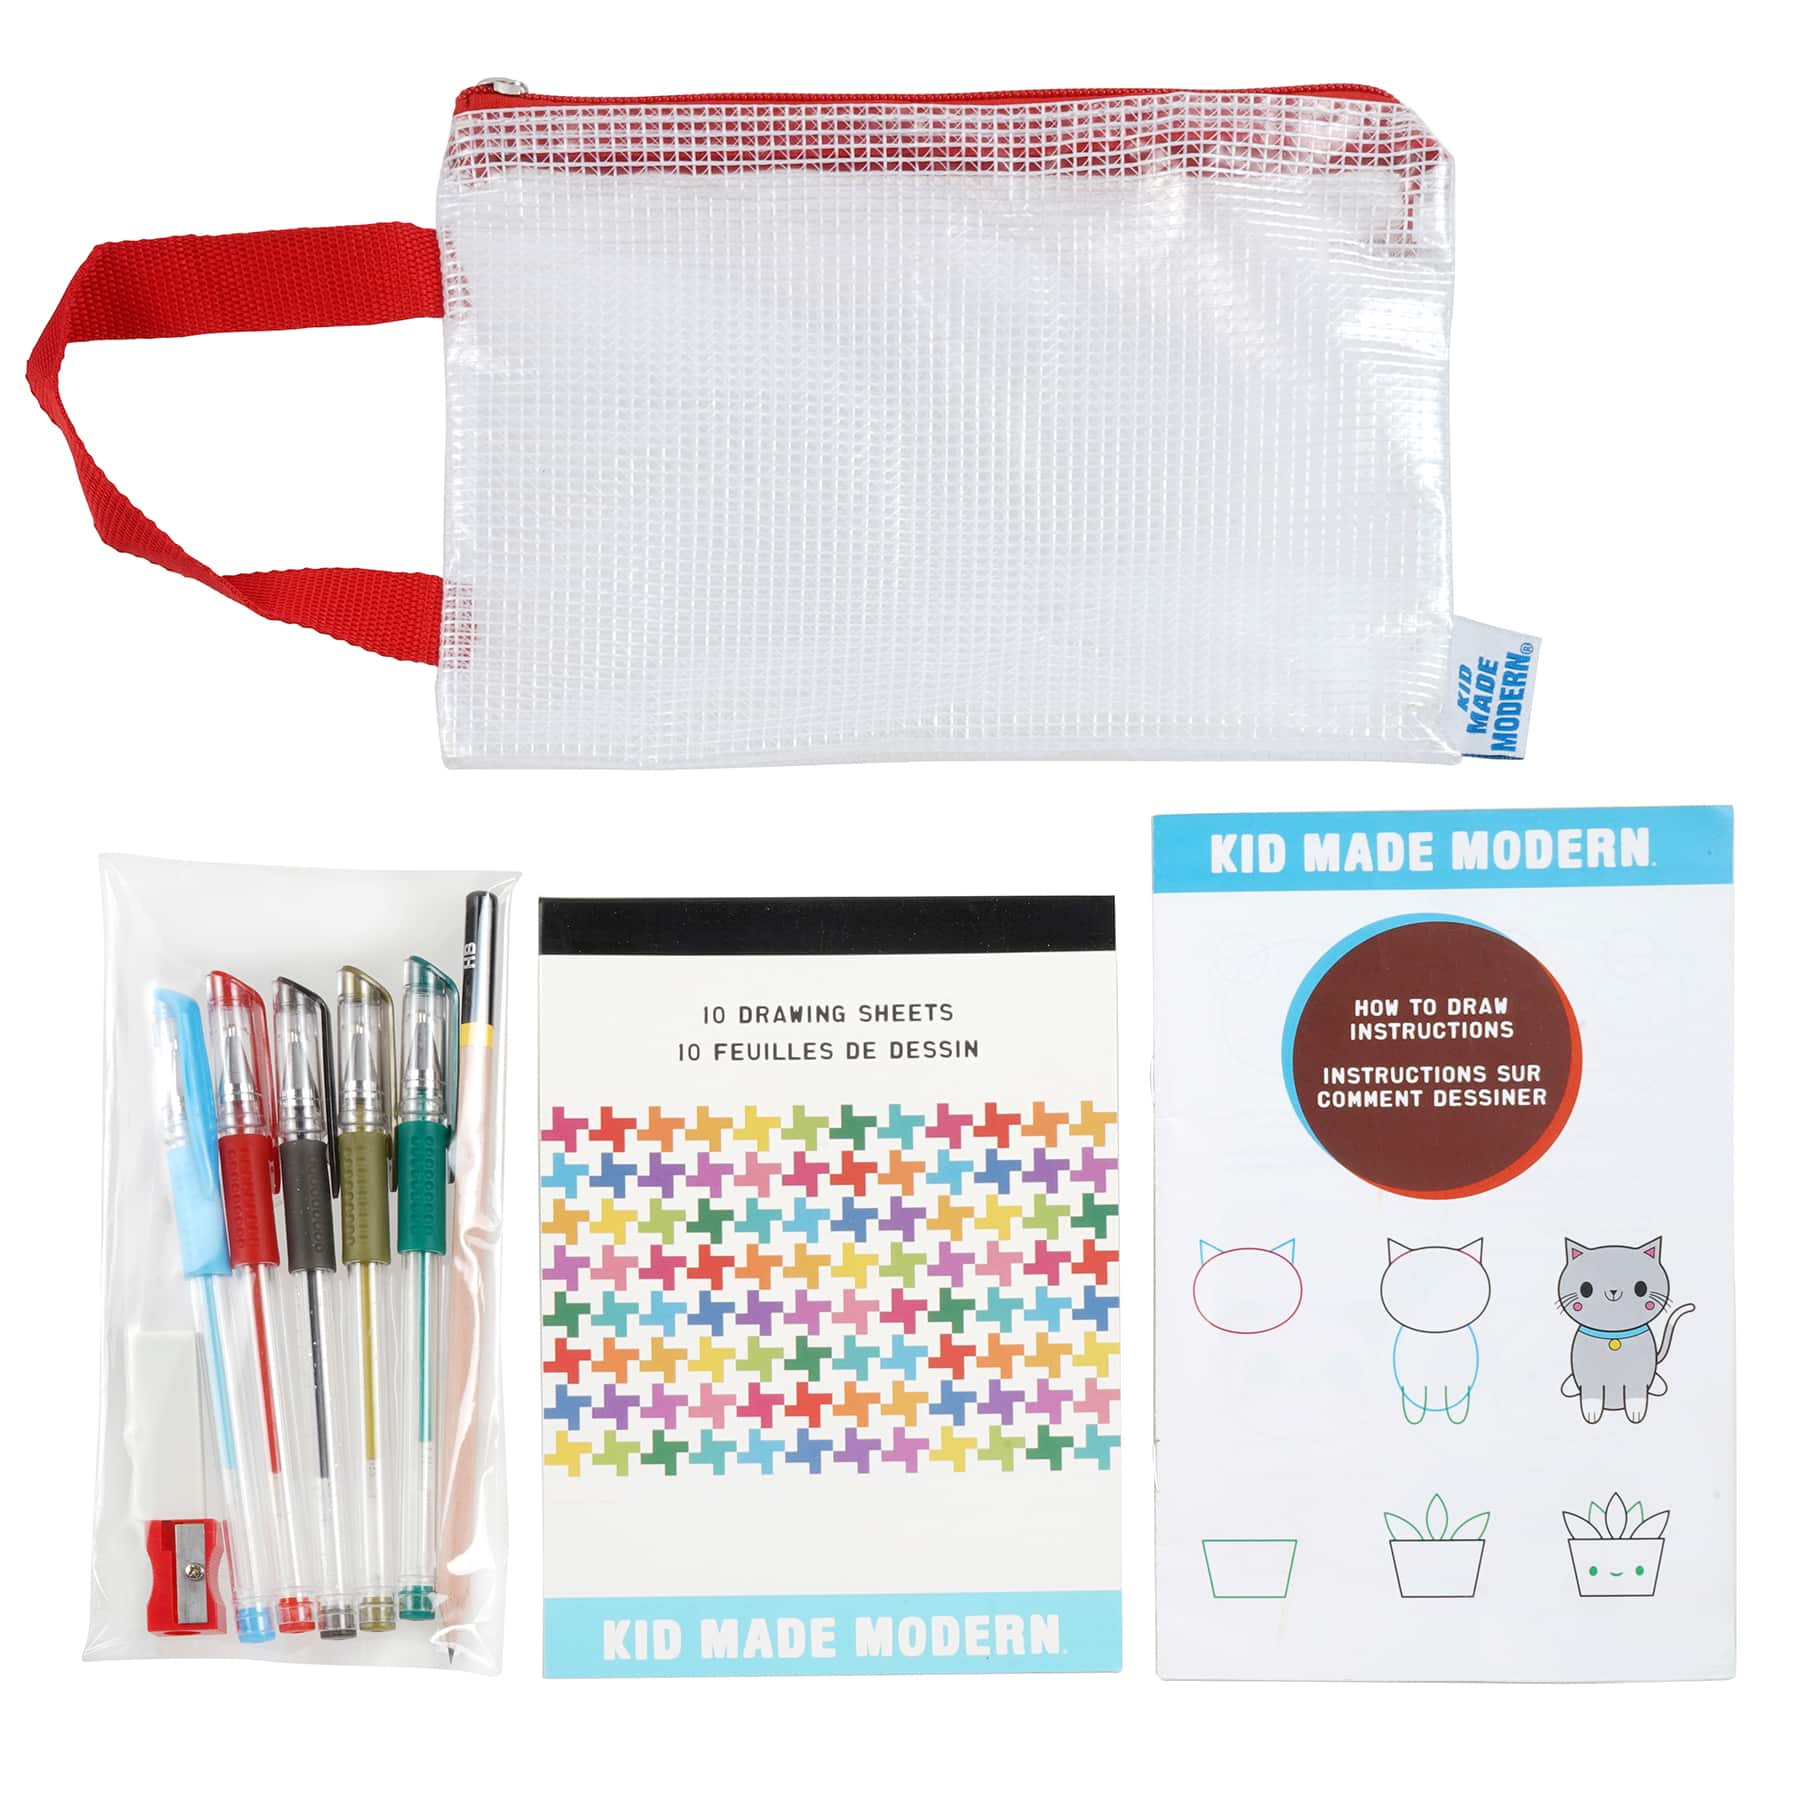 On-the-go Drawing Kit – Kid Made Modern